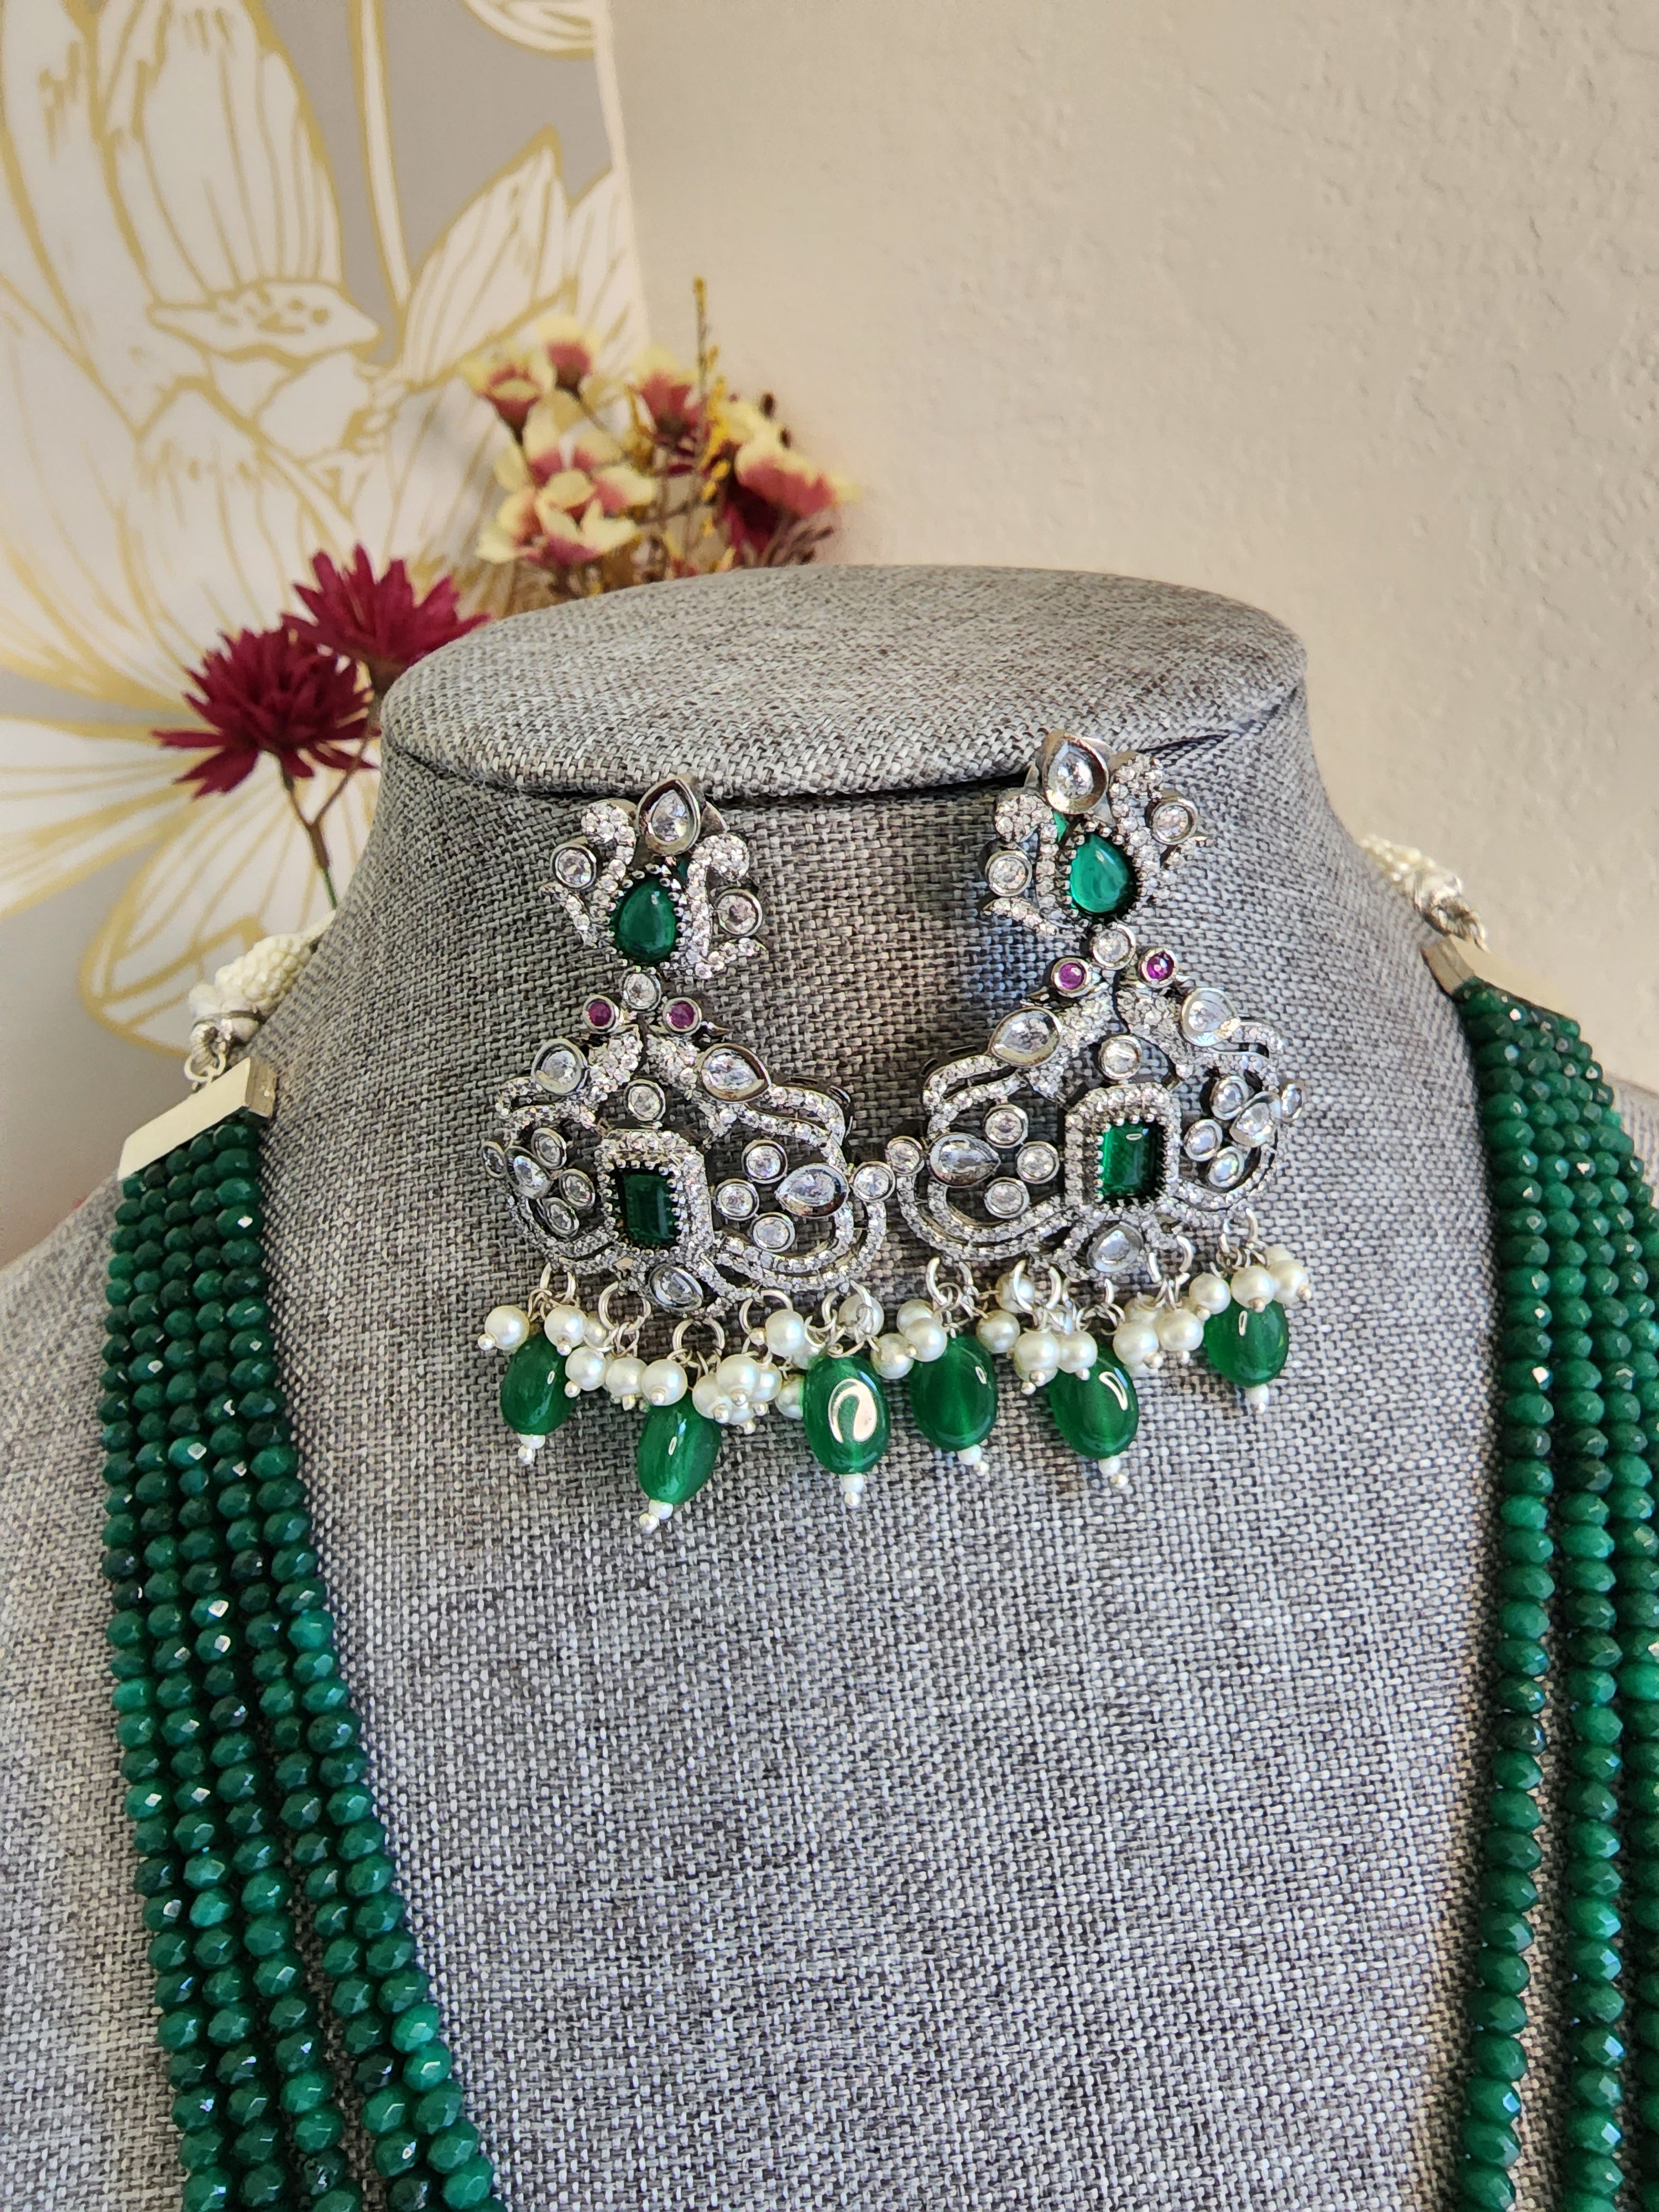 Victorian polki and cz necklace with earrings